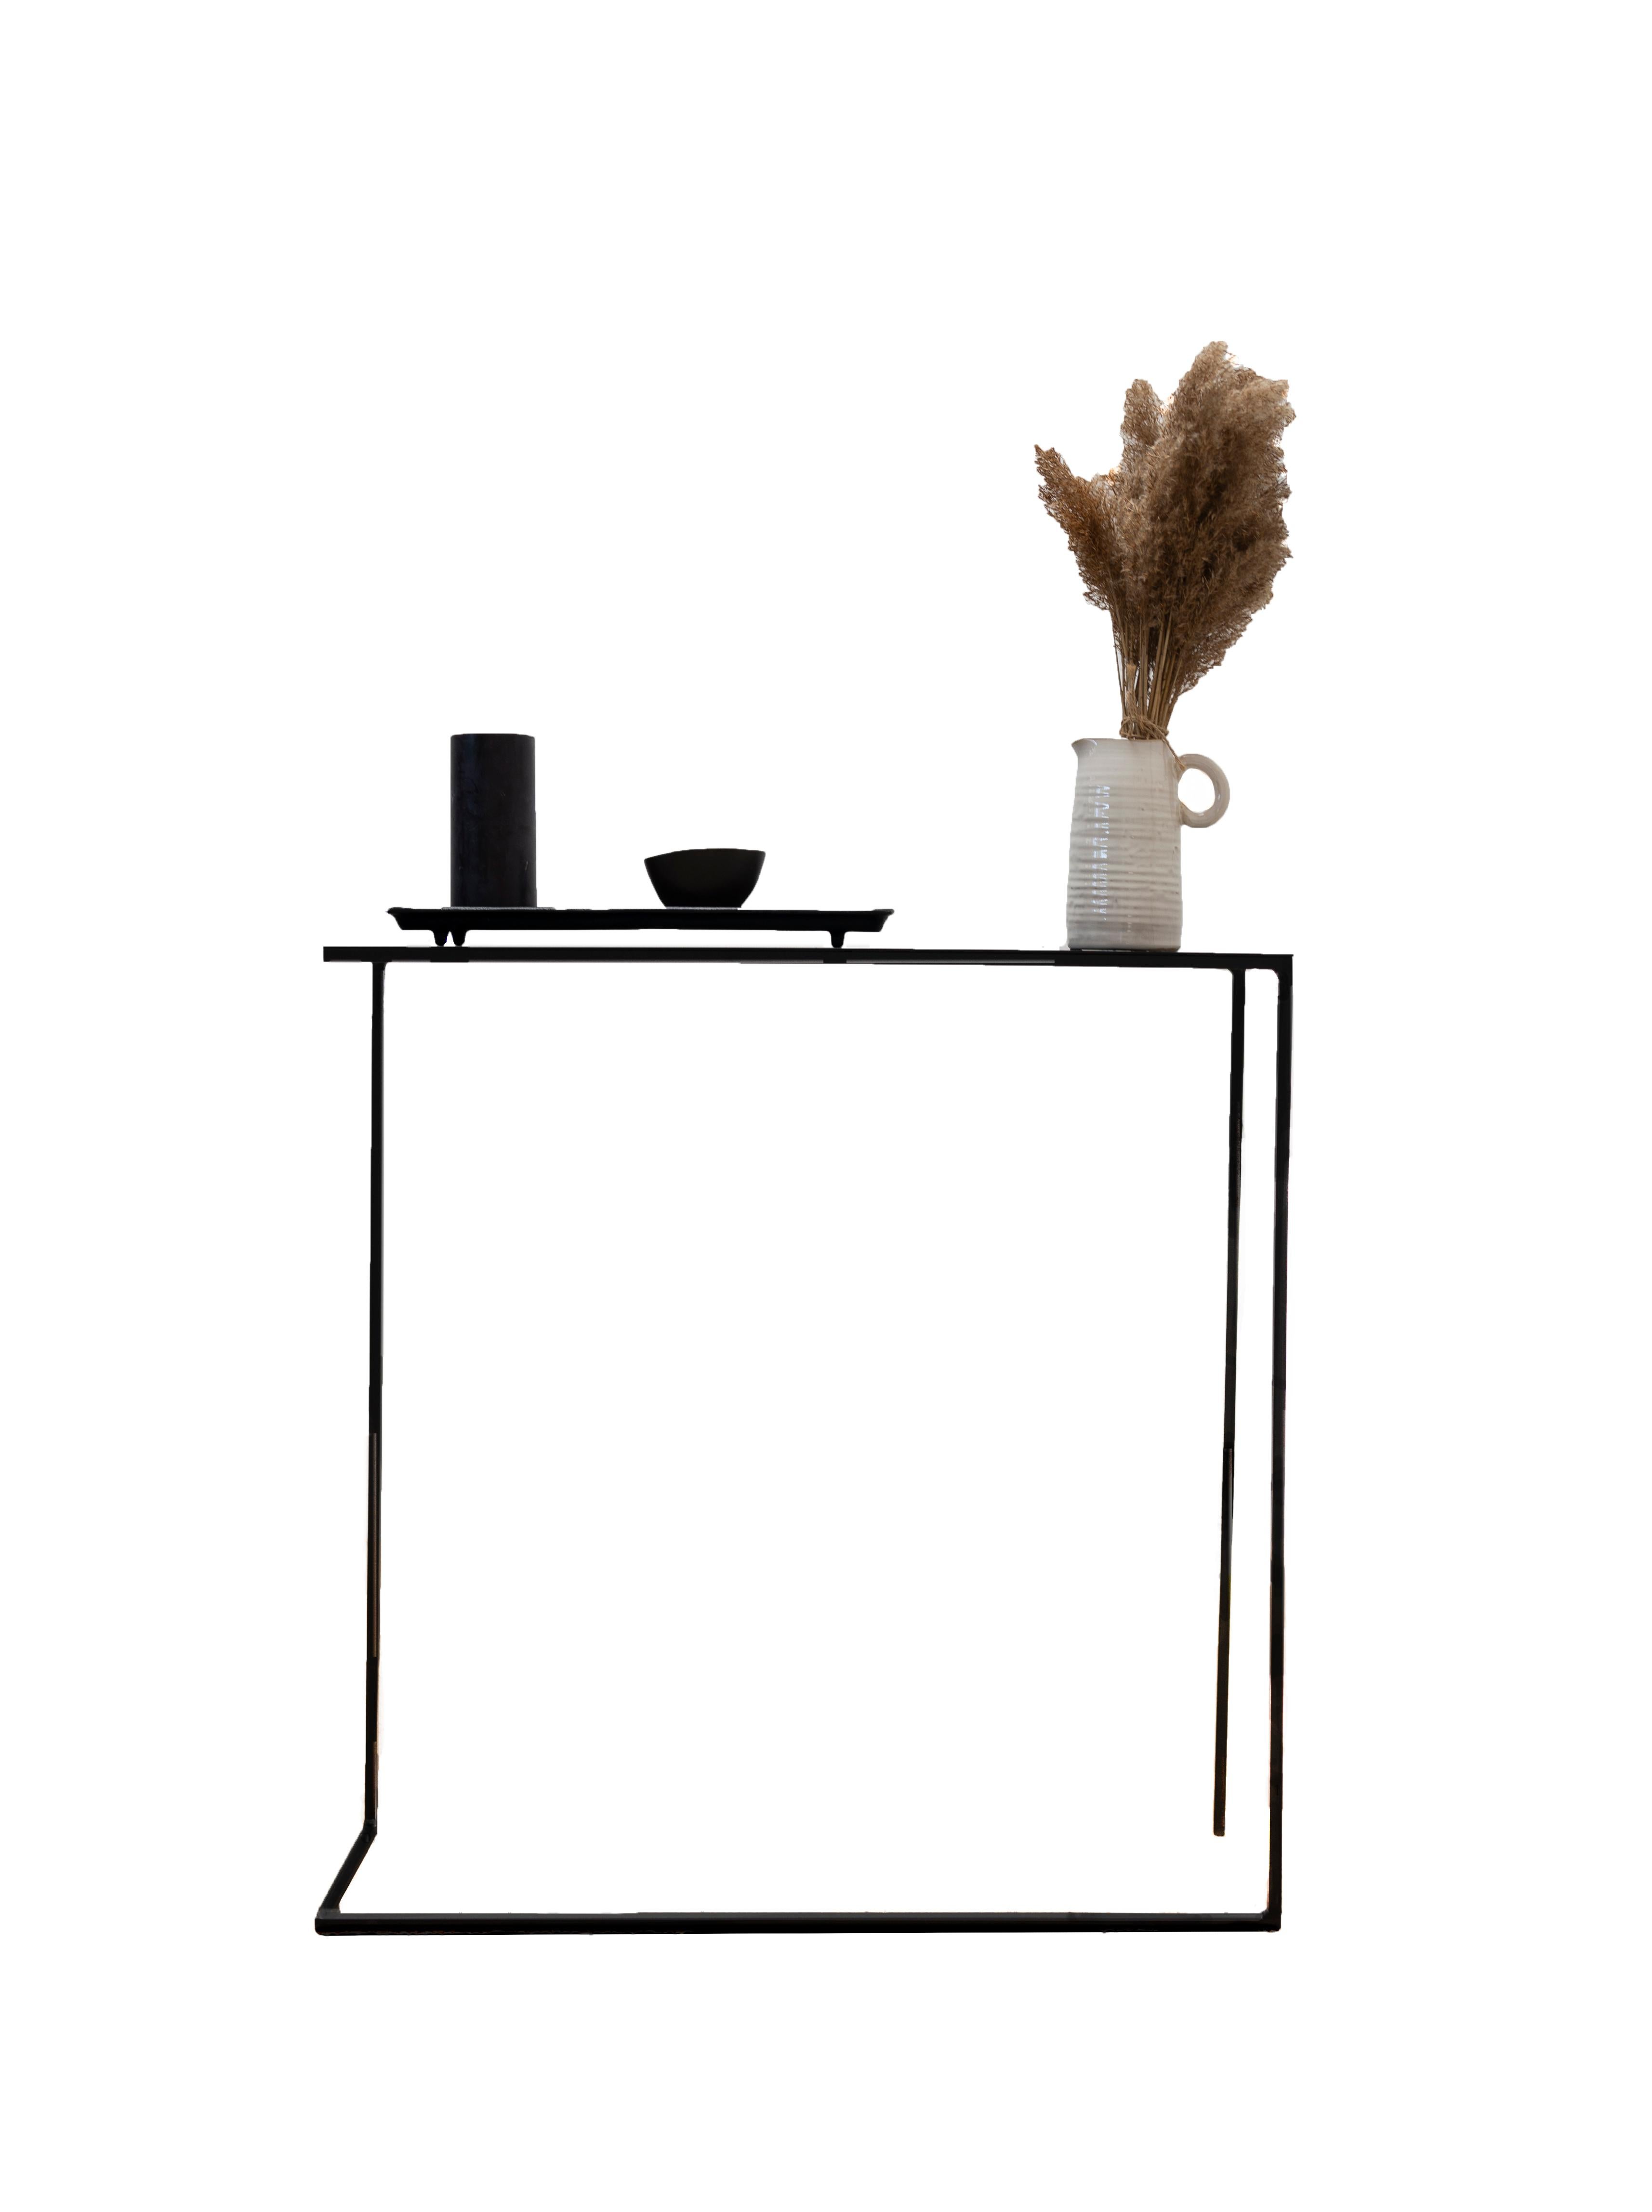 Object 015 Console Table by NG Design
Dimensions: D75 x W20 x H75 cm
Materials: Powder coated steel.

Also Available: All of objects available in different materials and colors on demand

Choose simplicity and a light line, the 